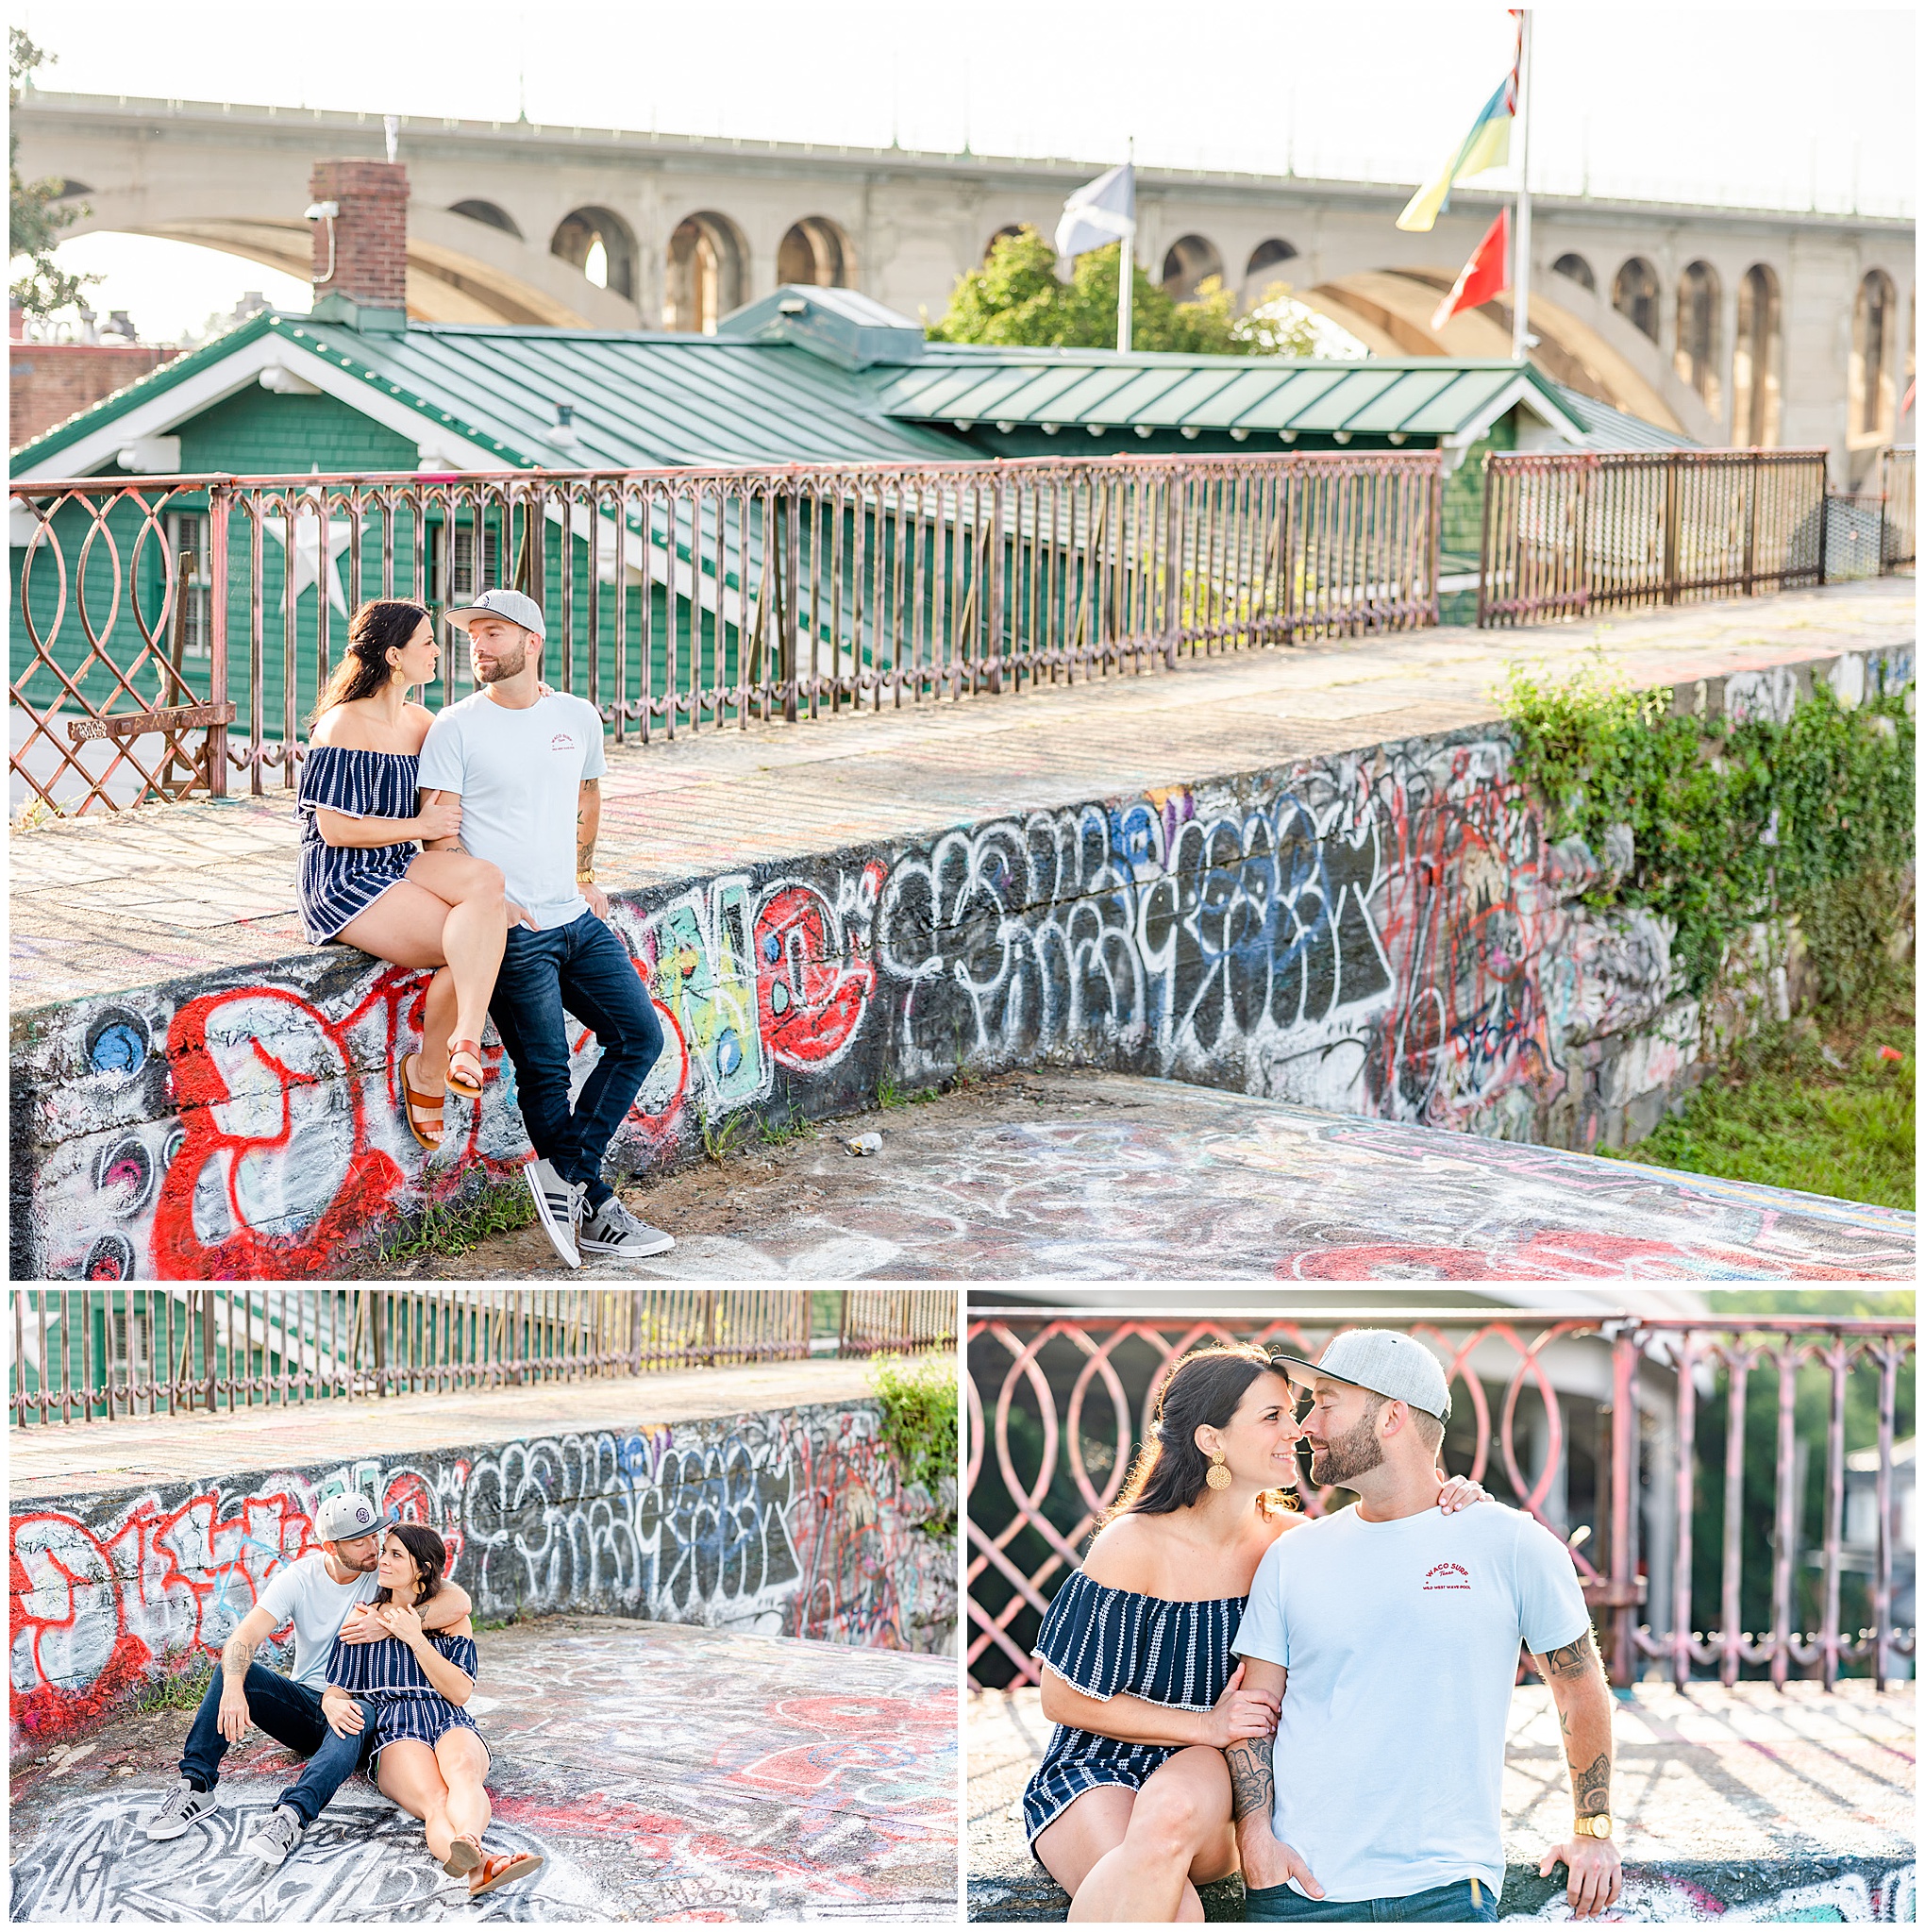 Georgetown waterfront engagement session, Georgetown engagement photos, Georgetown wedding photographer, DC wedding photographer, waterfront engagement photos, Georgetown waterfront engagement photos, DC engagement photos, Rachel E.H. Photography, summer engagement photos, couple sitting on graffitied wall, man with arm around woman, woman holding man's arm